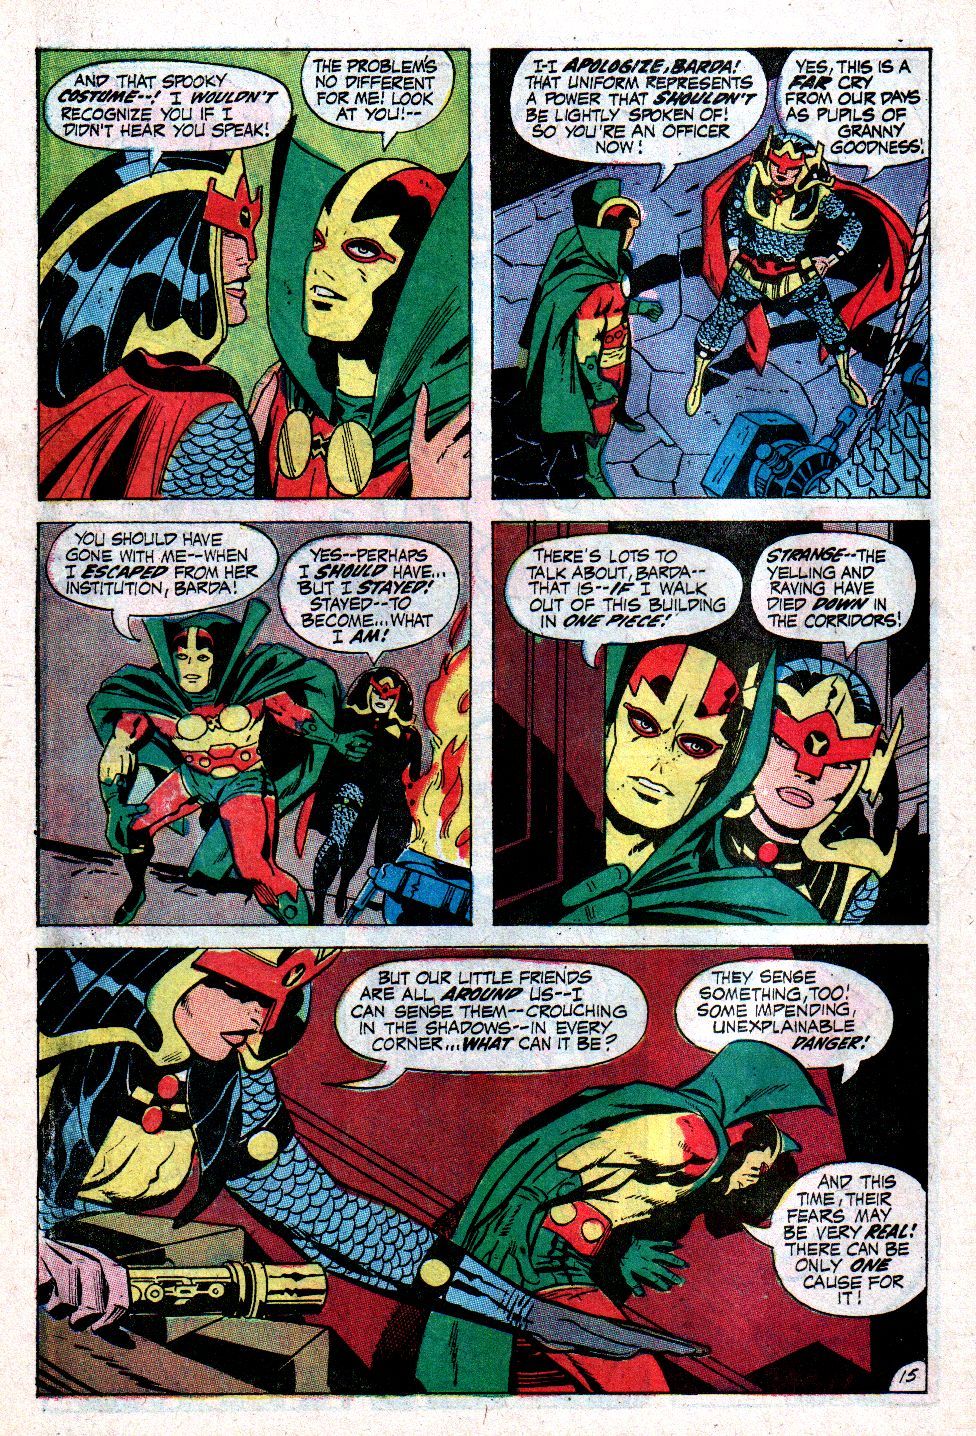 Was Big Barda Originally Not Going to be Part of the New Gods?